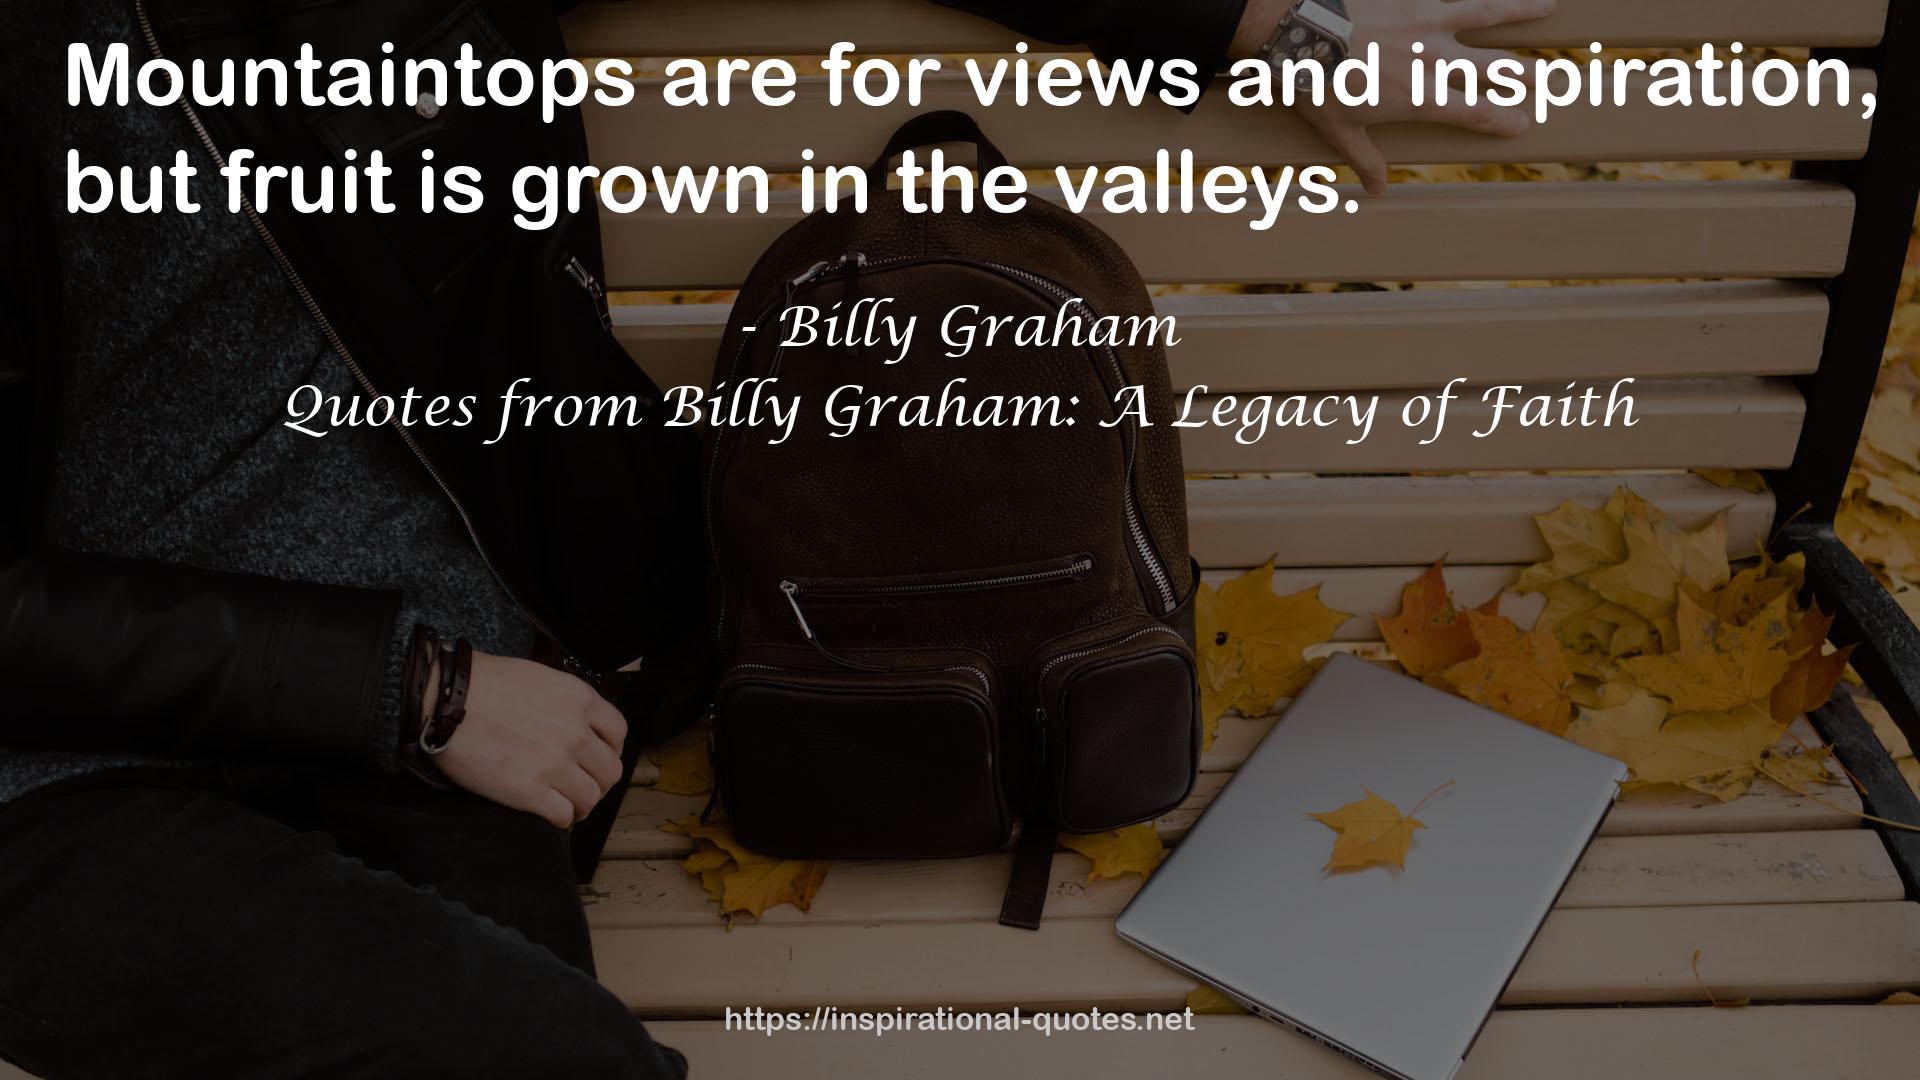 Quotes from Billy Graham: A Legacy of Faith QUOTES